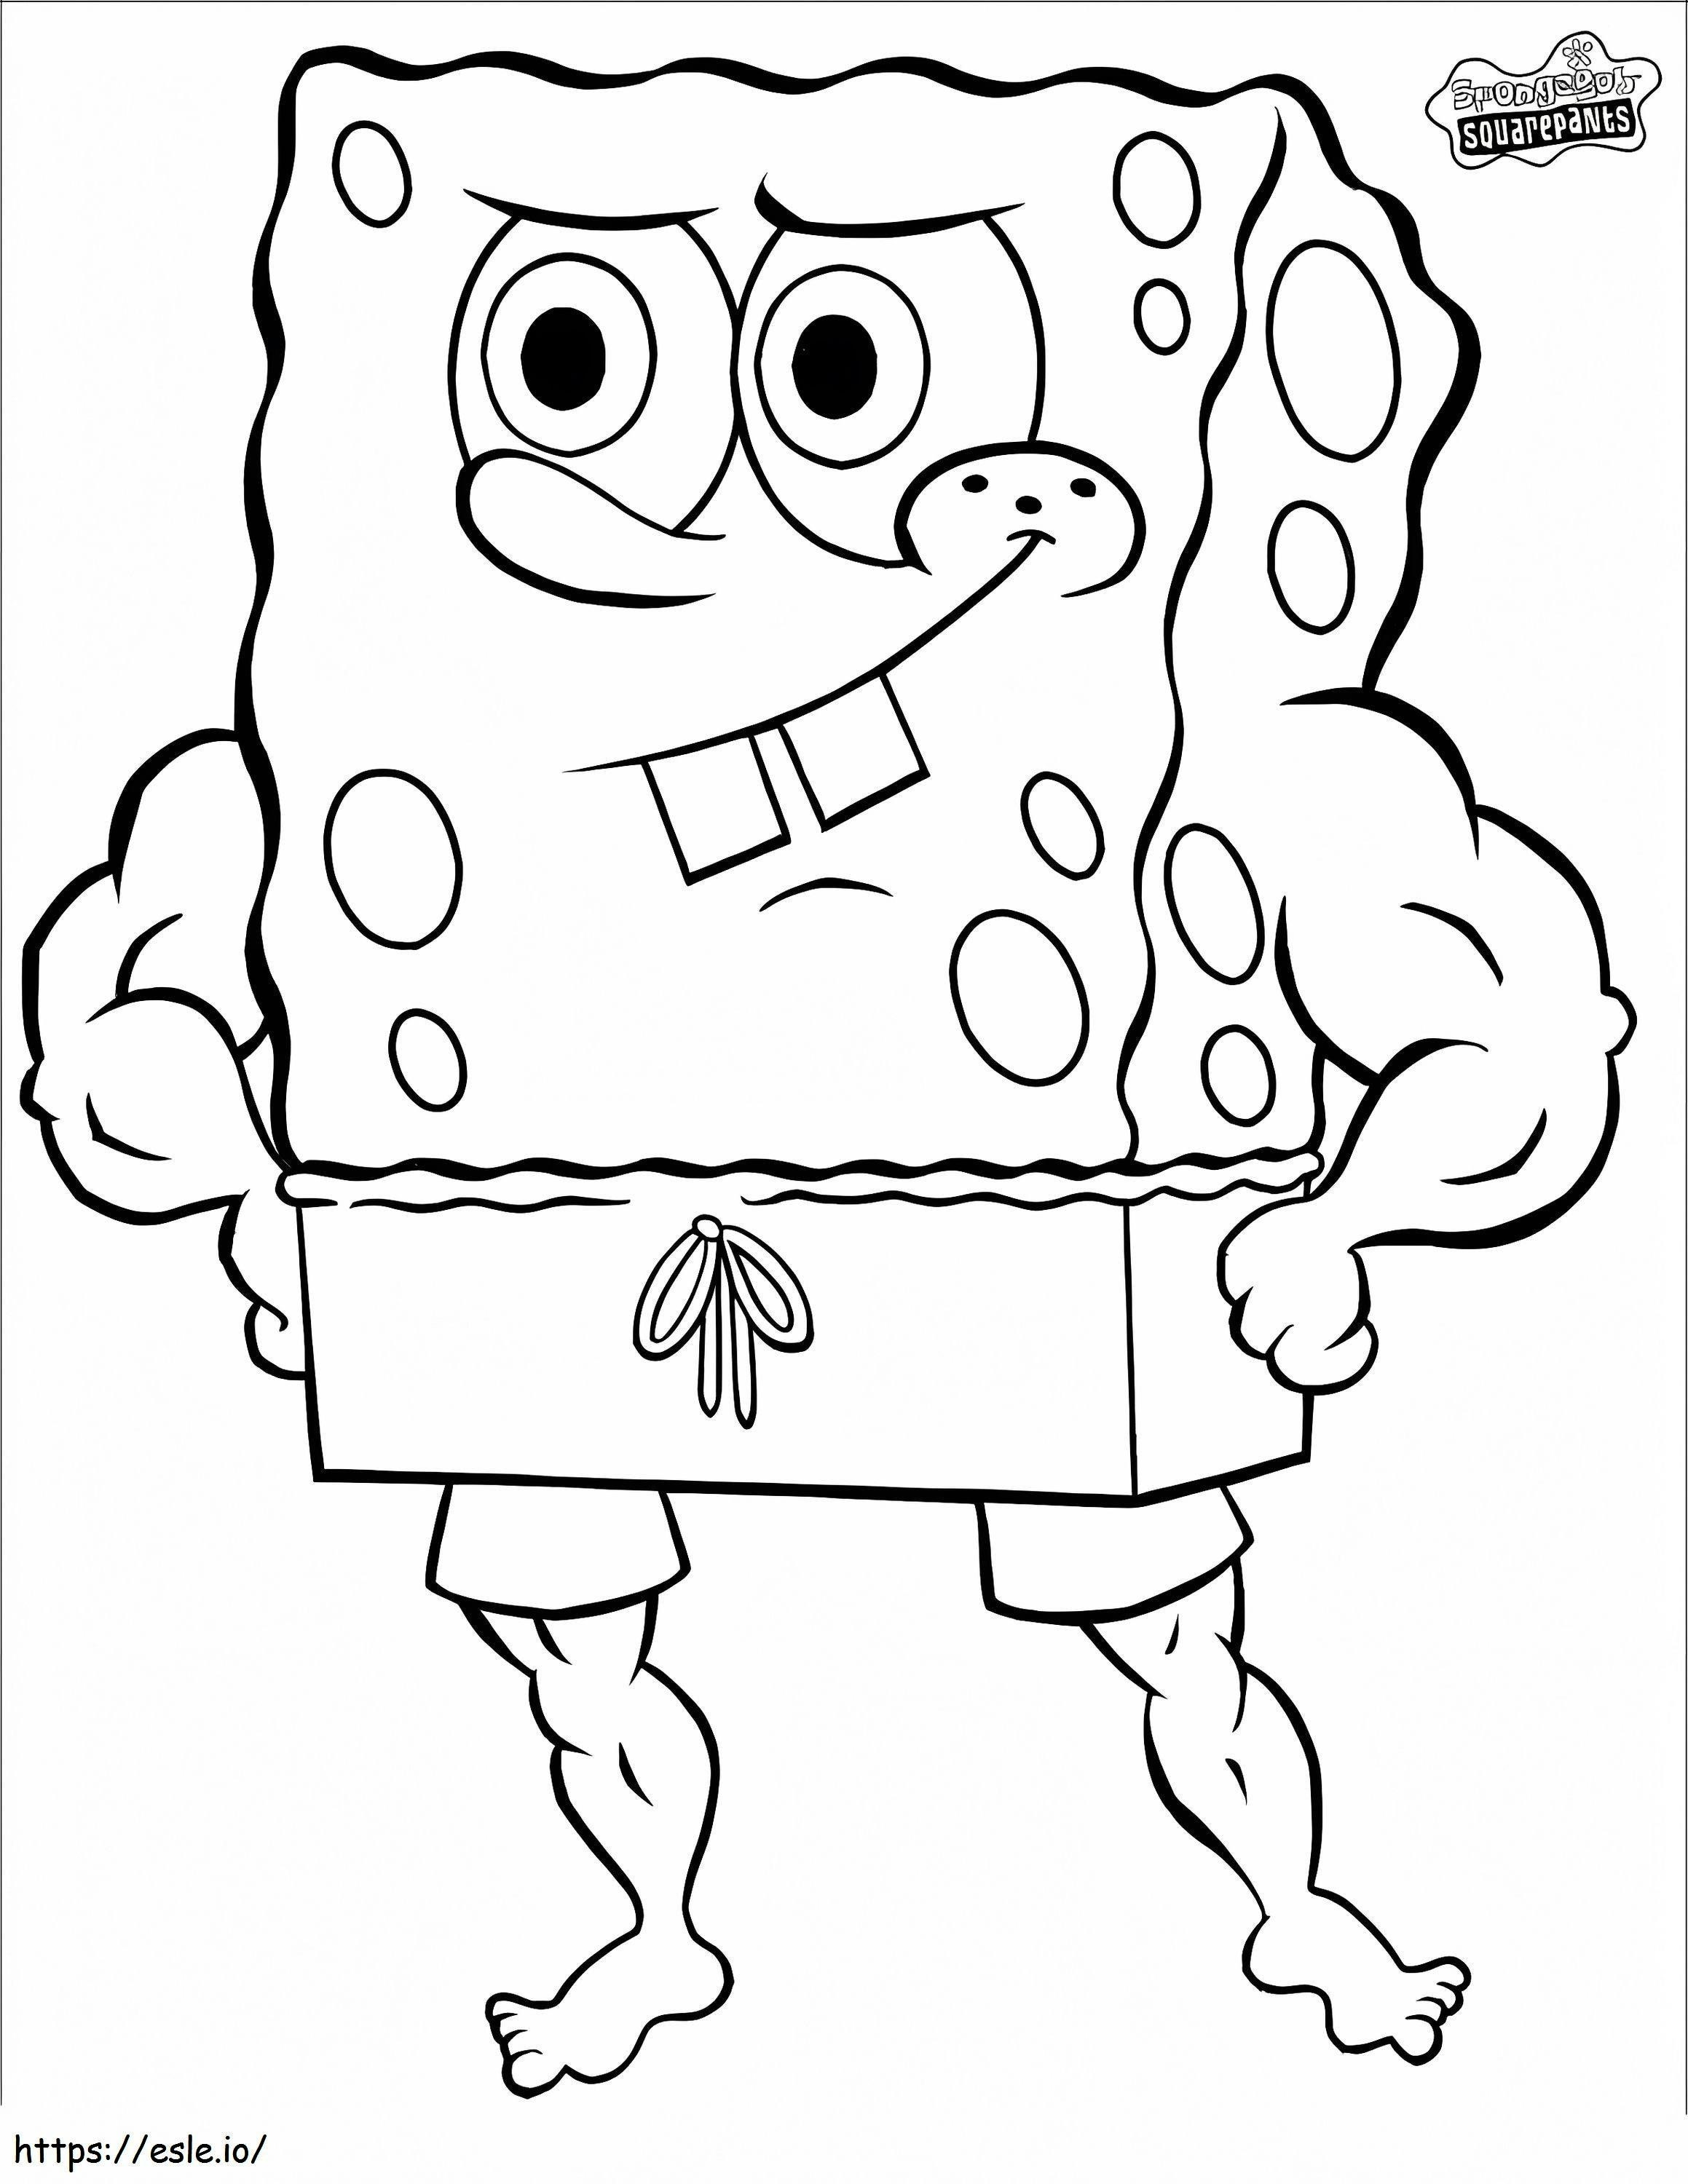 Spongebob Strong coloring page